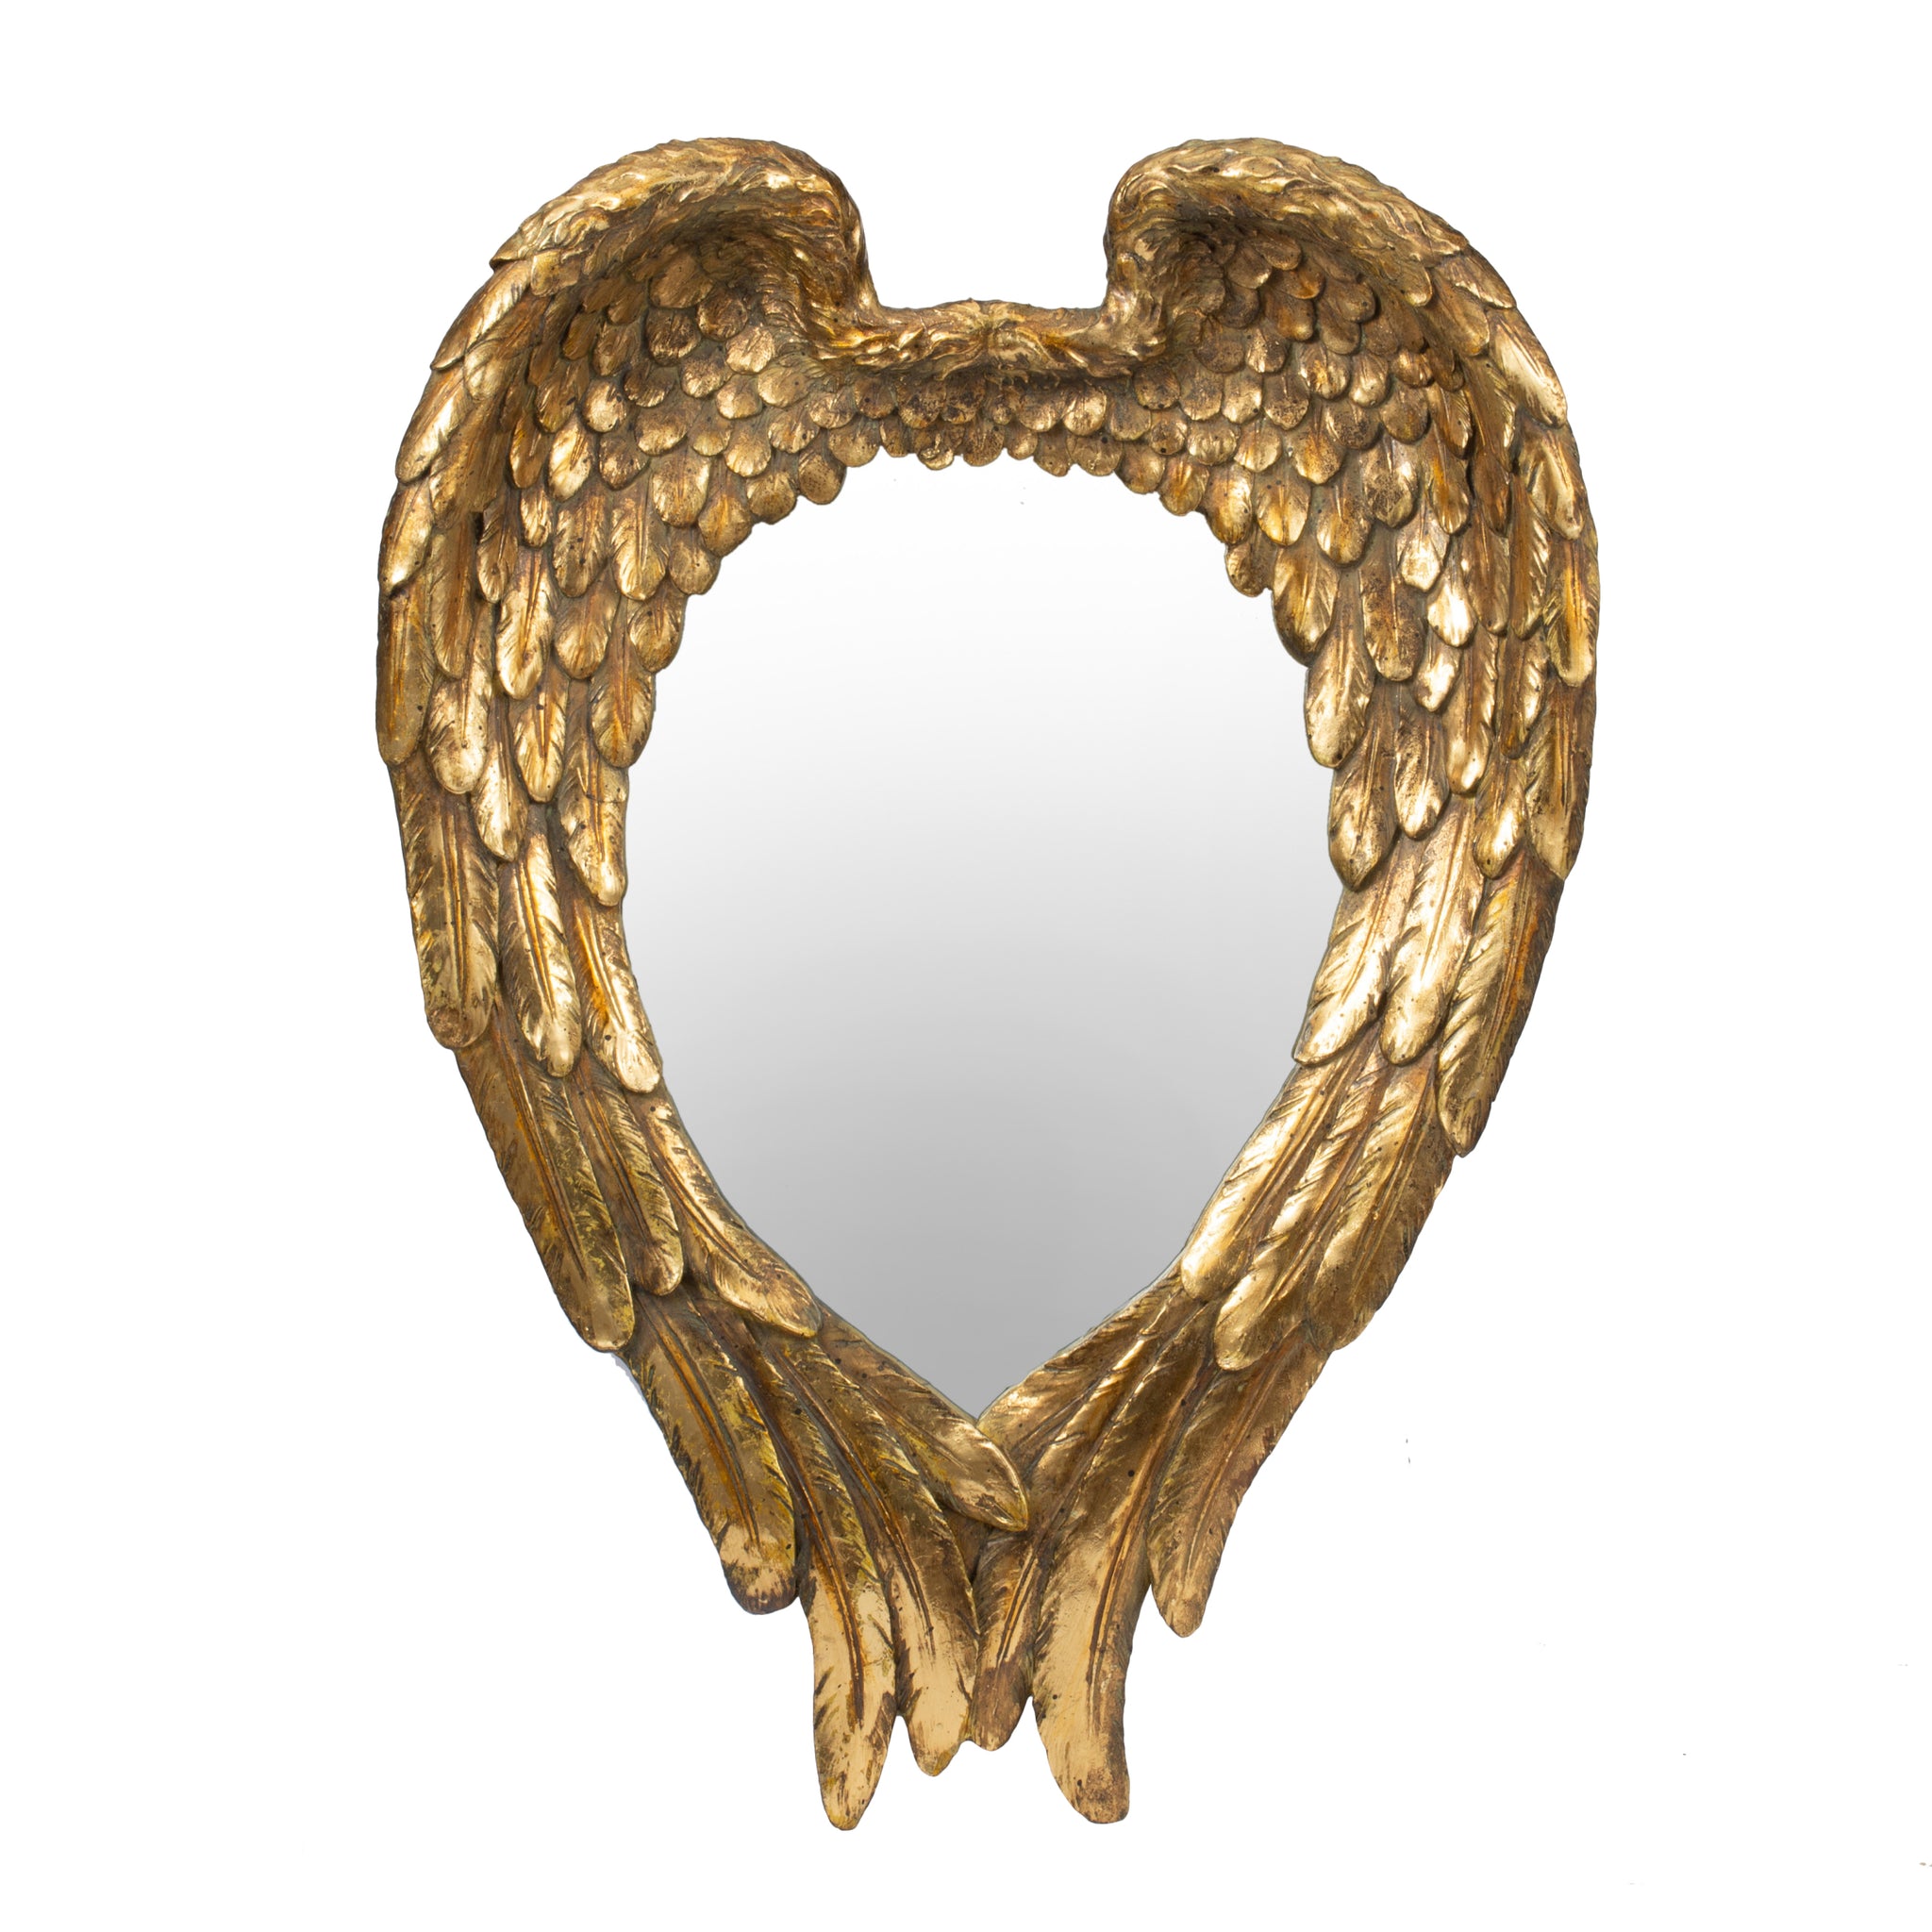 22" x 16" Golden Wing Accent Mirror, Wall Mirror